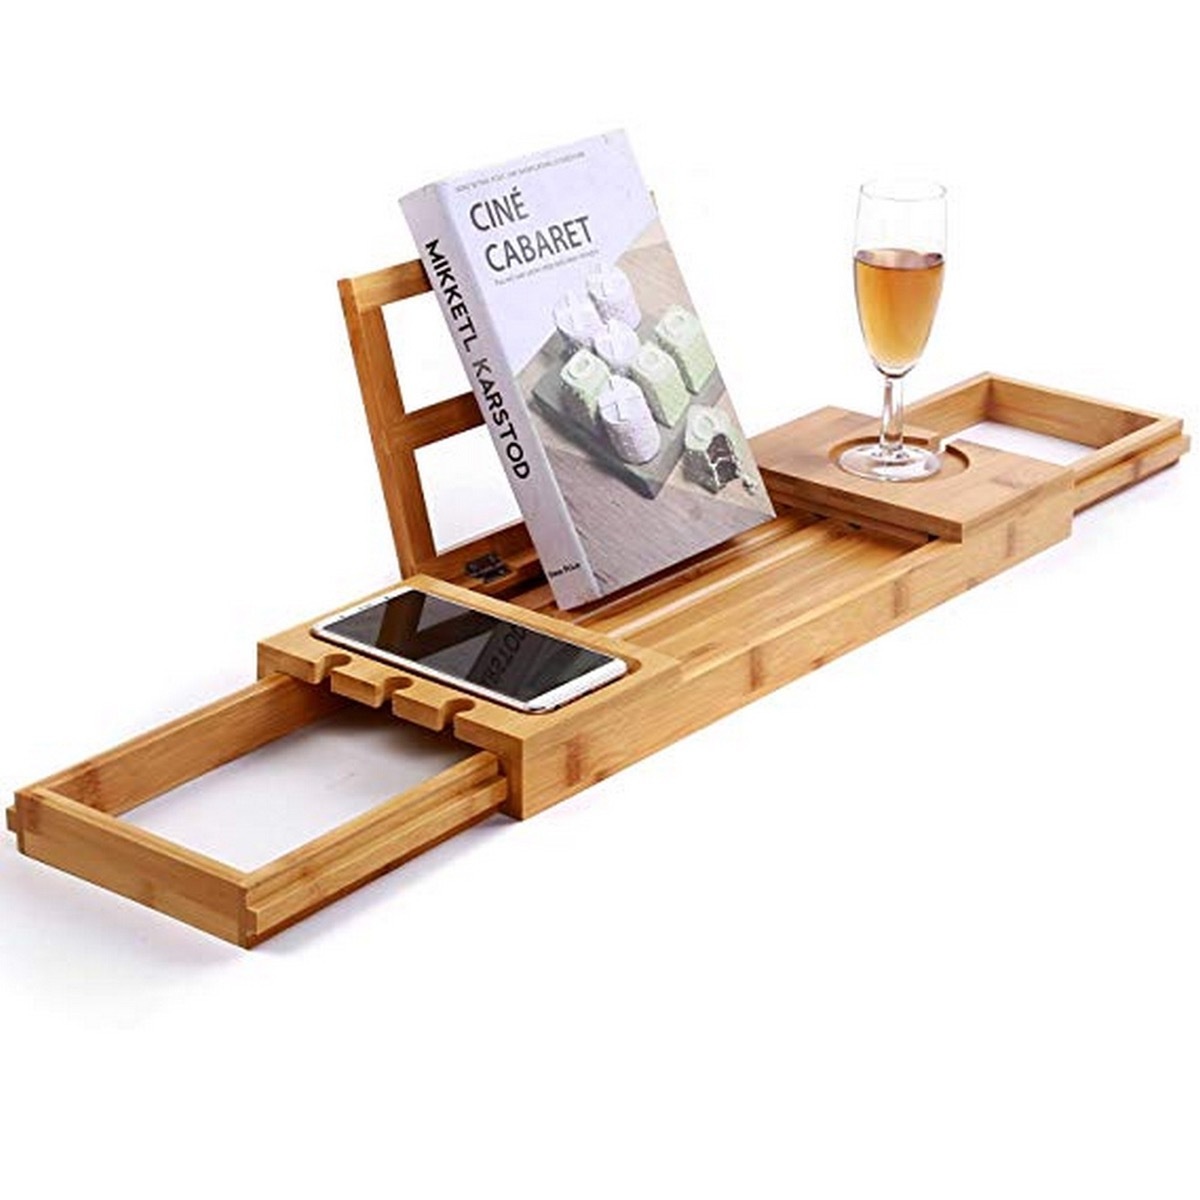 wooden tray with book and champagne and phone on it, bathroom accessories